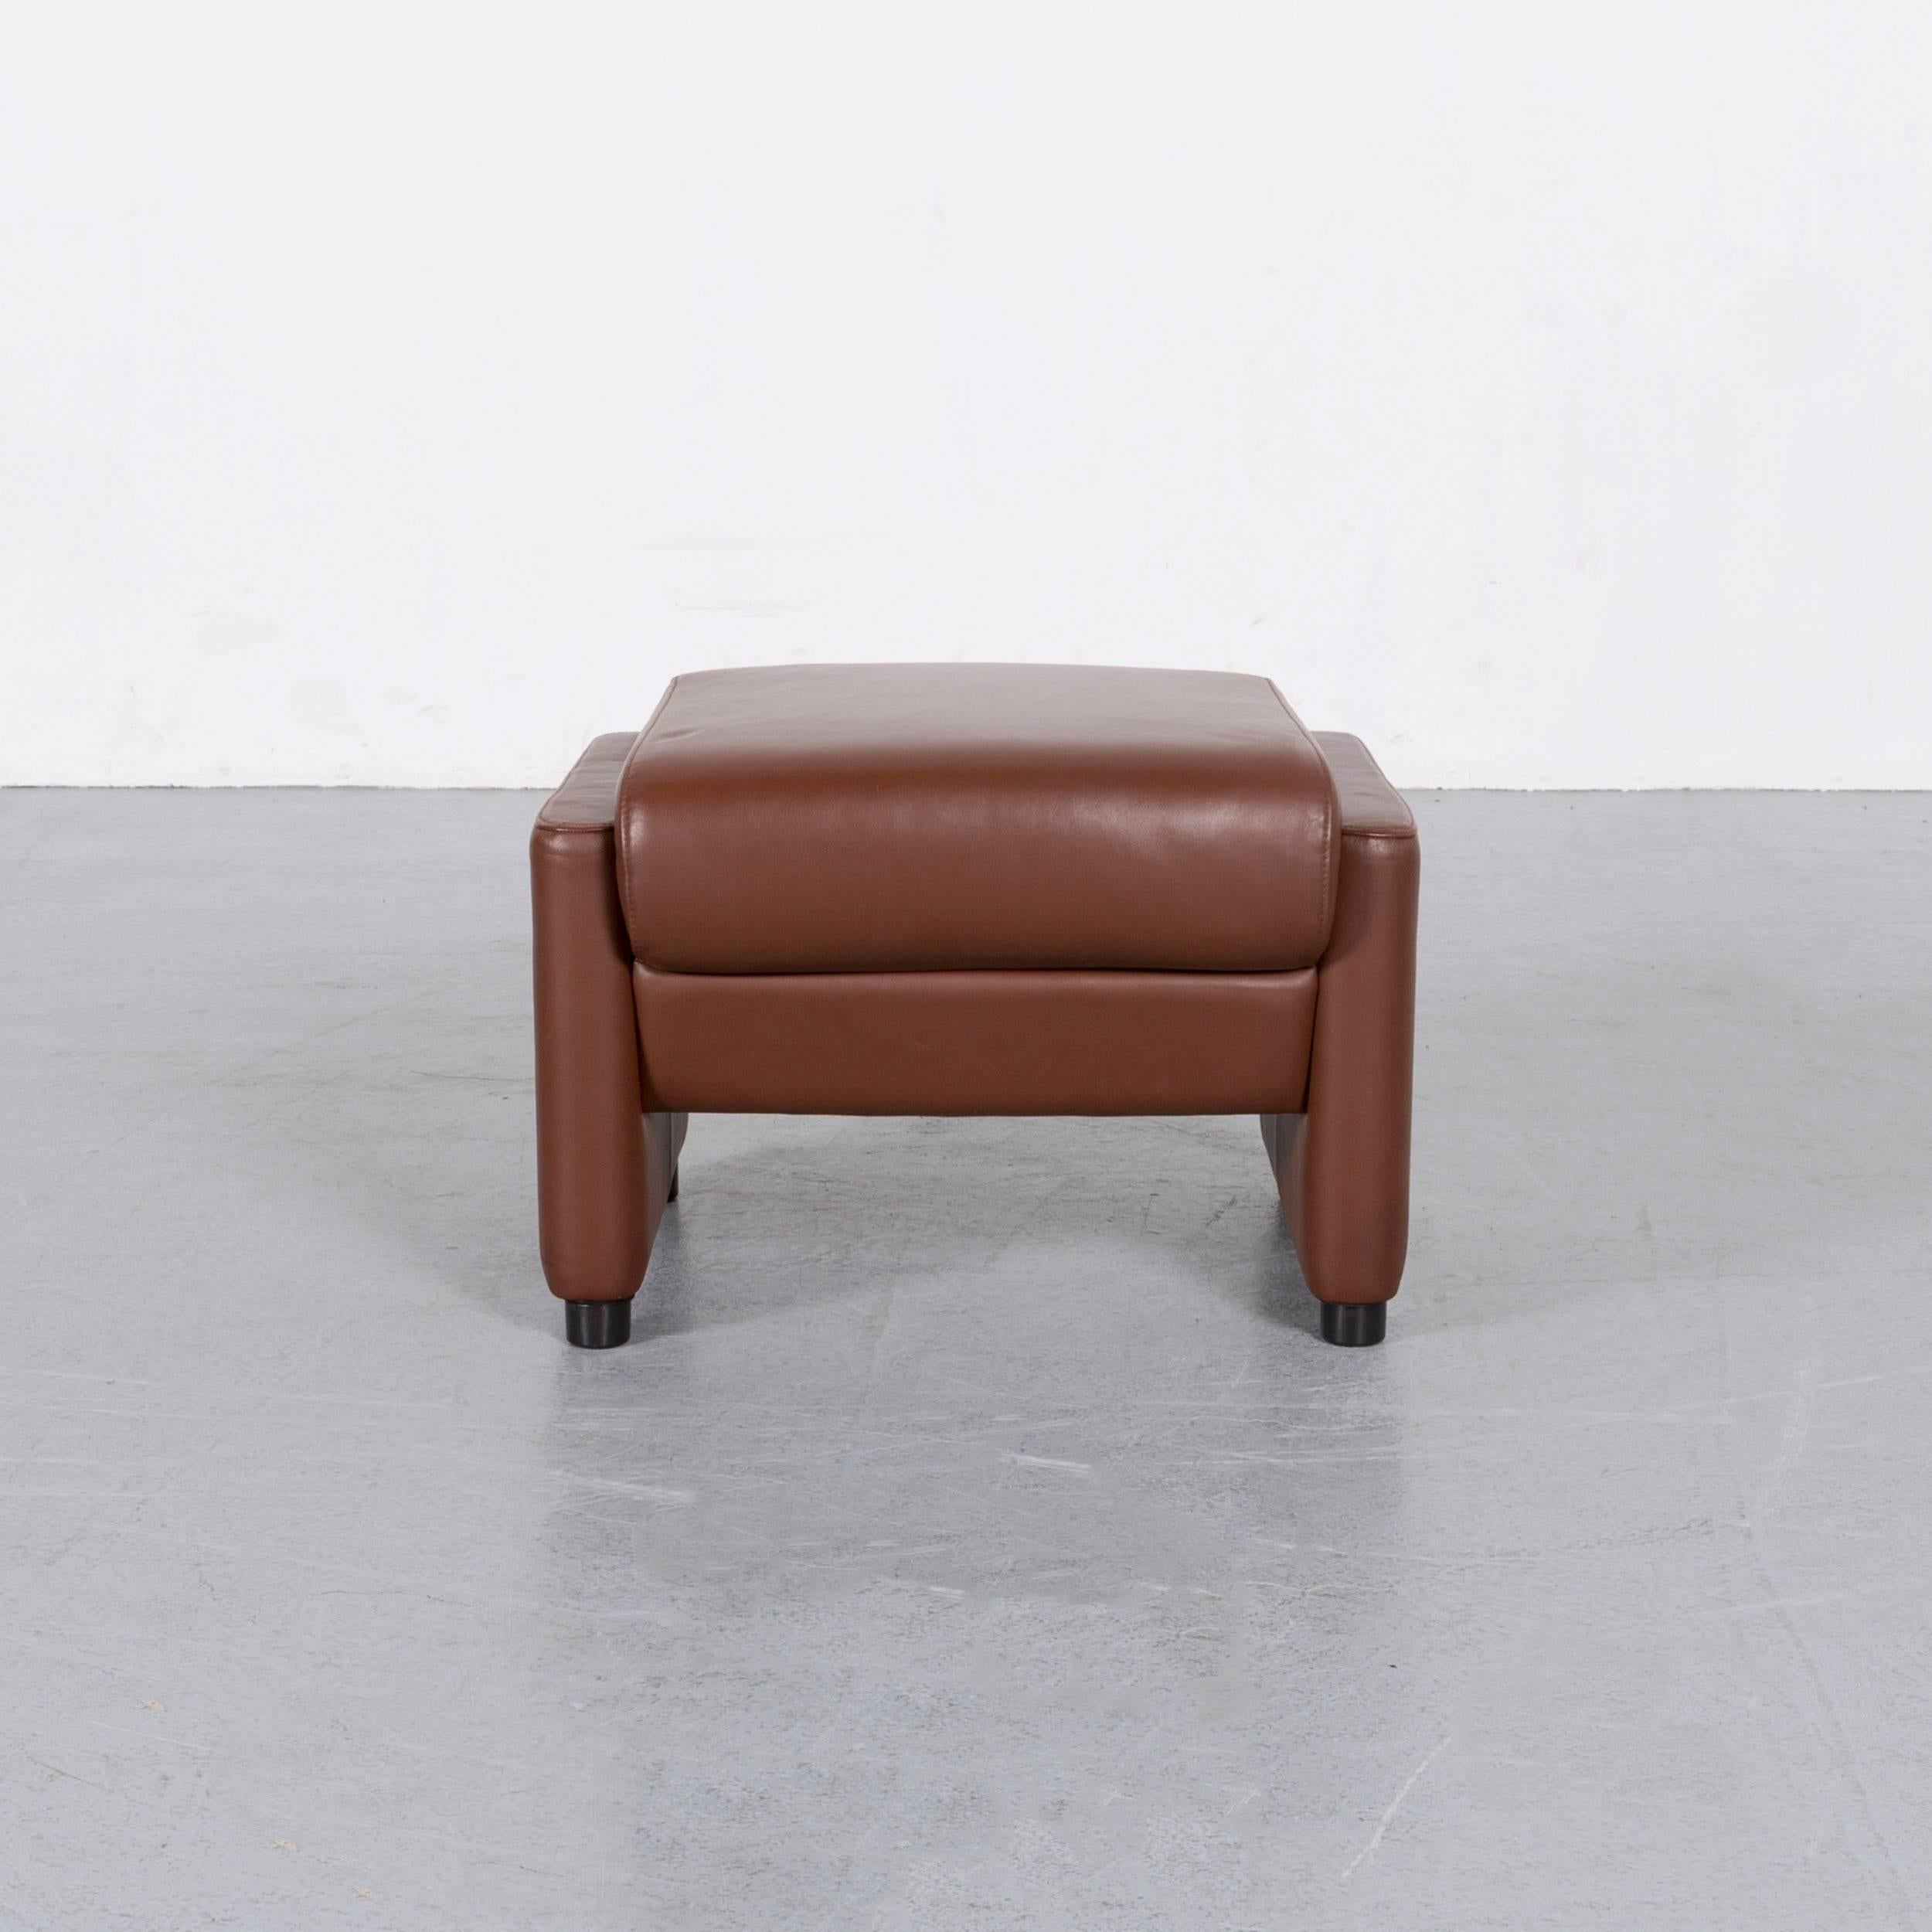 Erpo Designer Footstool Leather Brown Sofa Couch In Good Condition For Sale In Cologne, DE